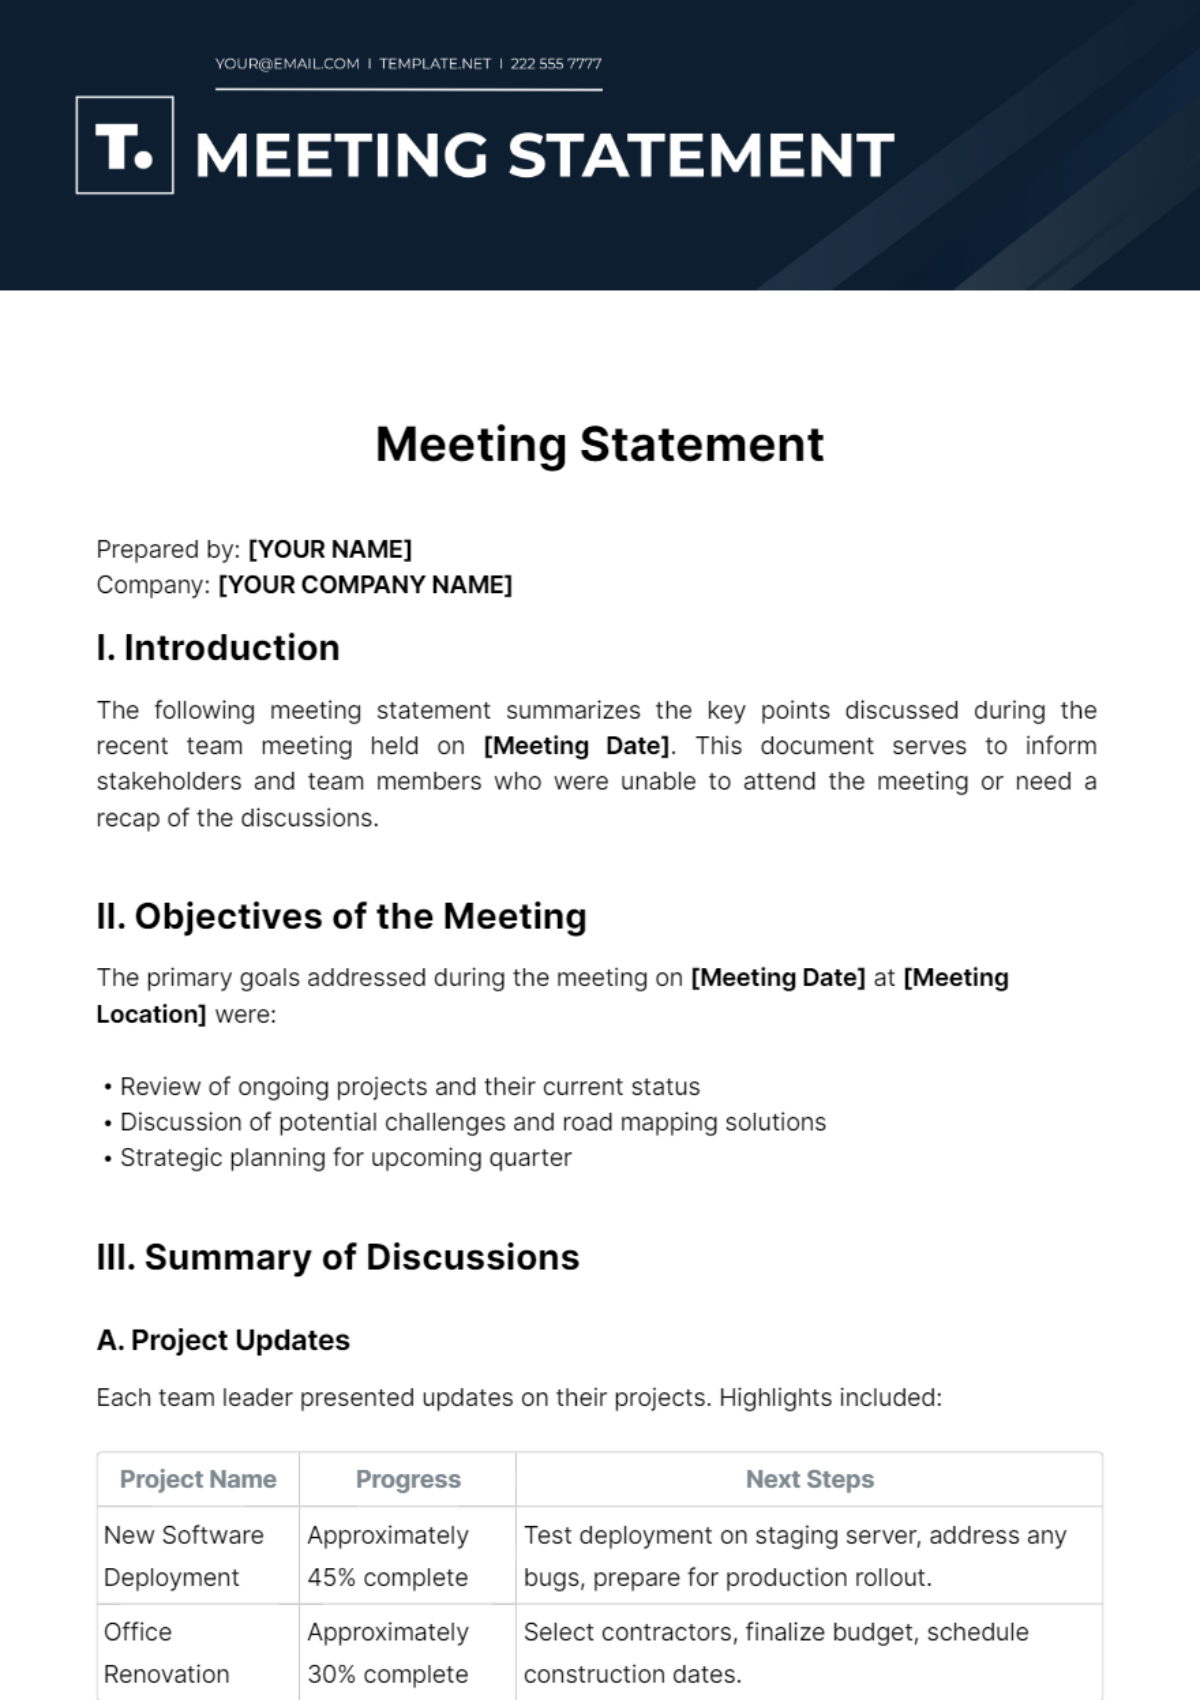 Meeting Statement Template